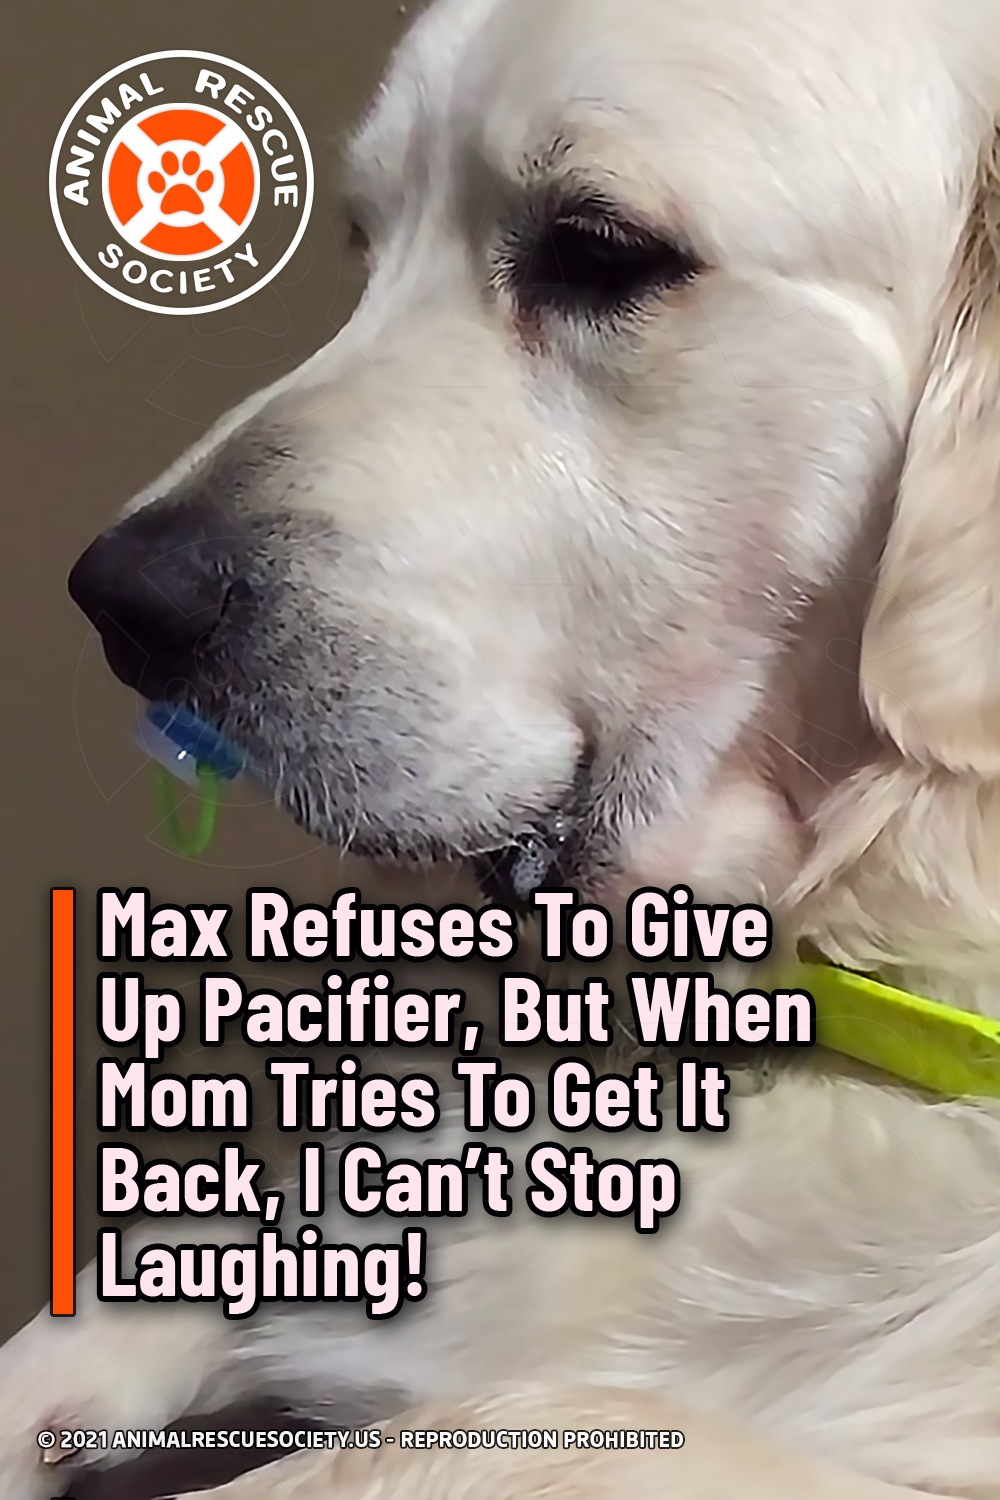 Max Refuses To Give Up Pacifier, But When Mom Tries To Get It Back, I Can’t Stop Laughing!